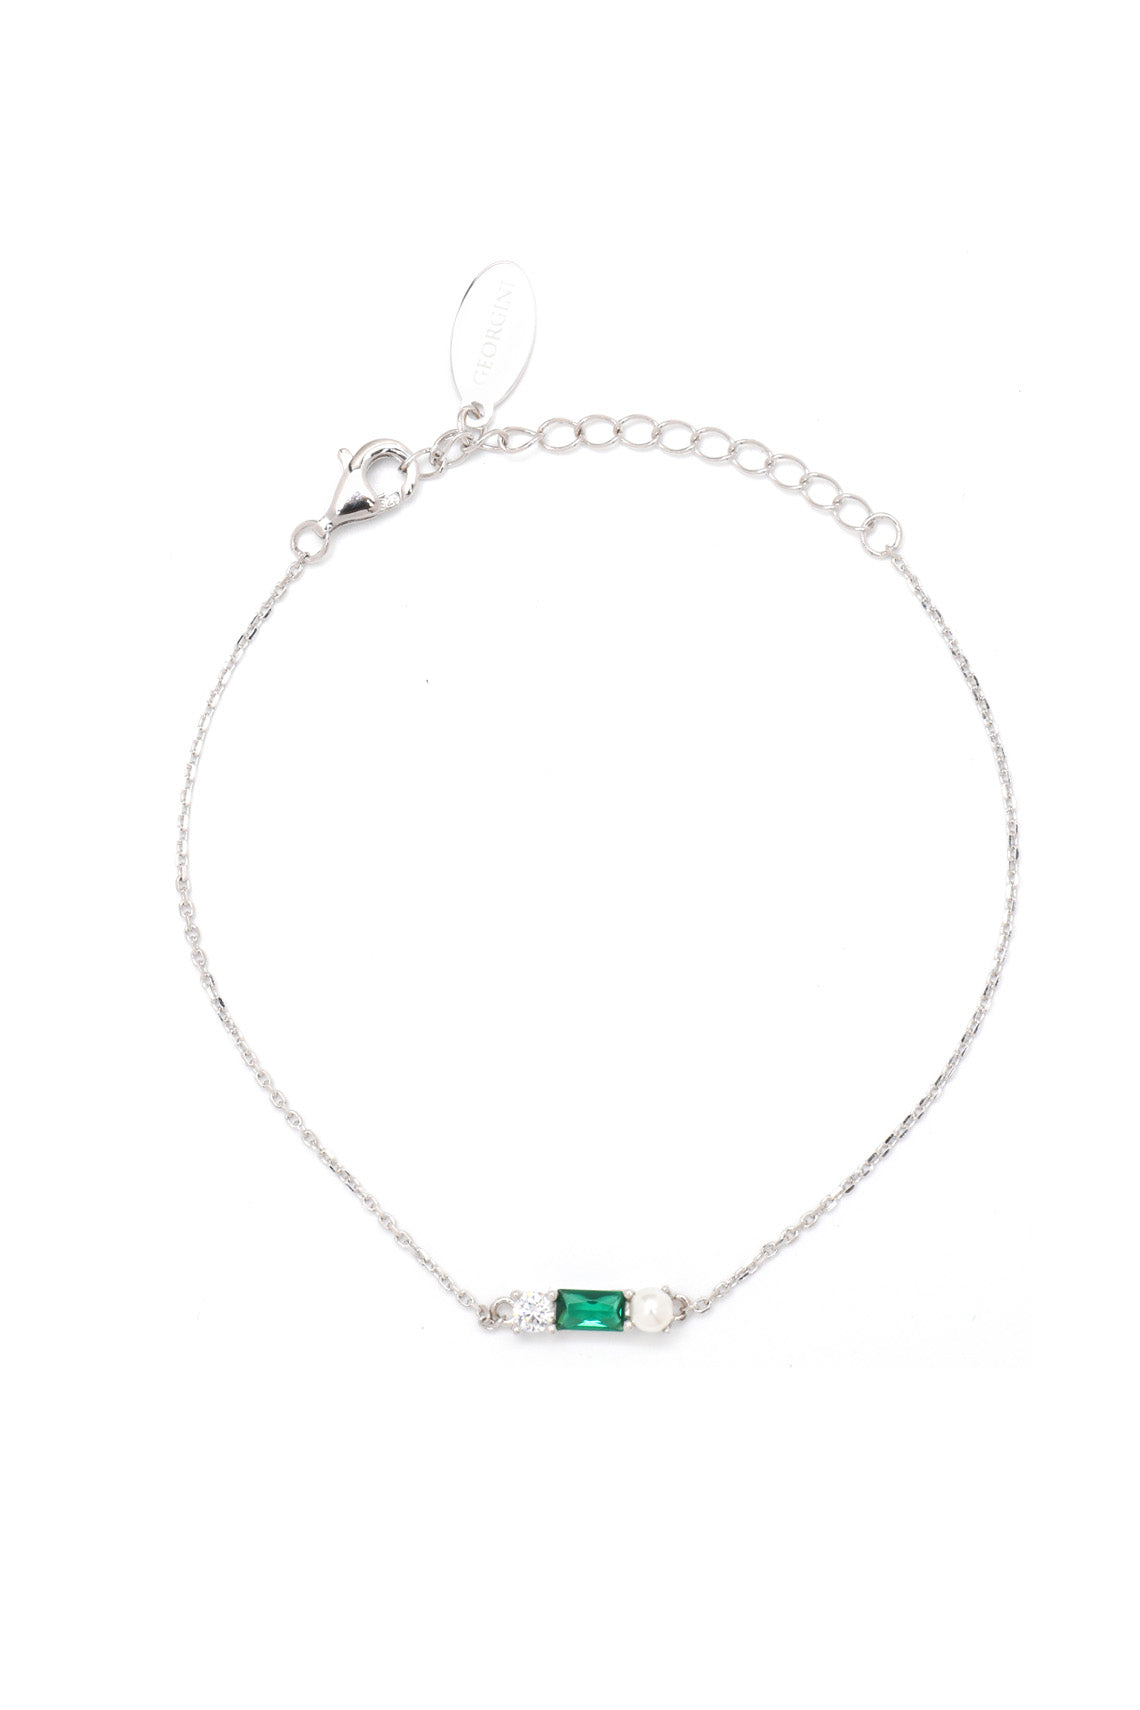 EMERALD ISLE FRESHWATER PEARL BRACELET IN EMERALD AND SILVER